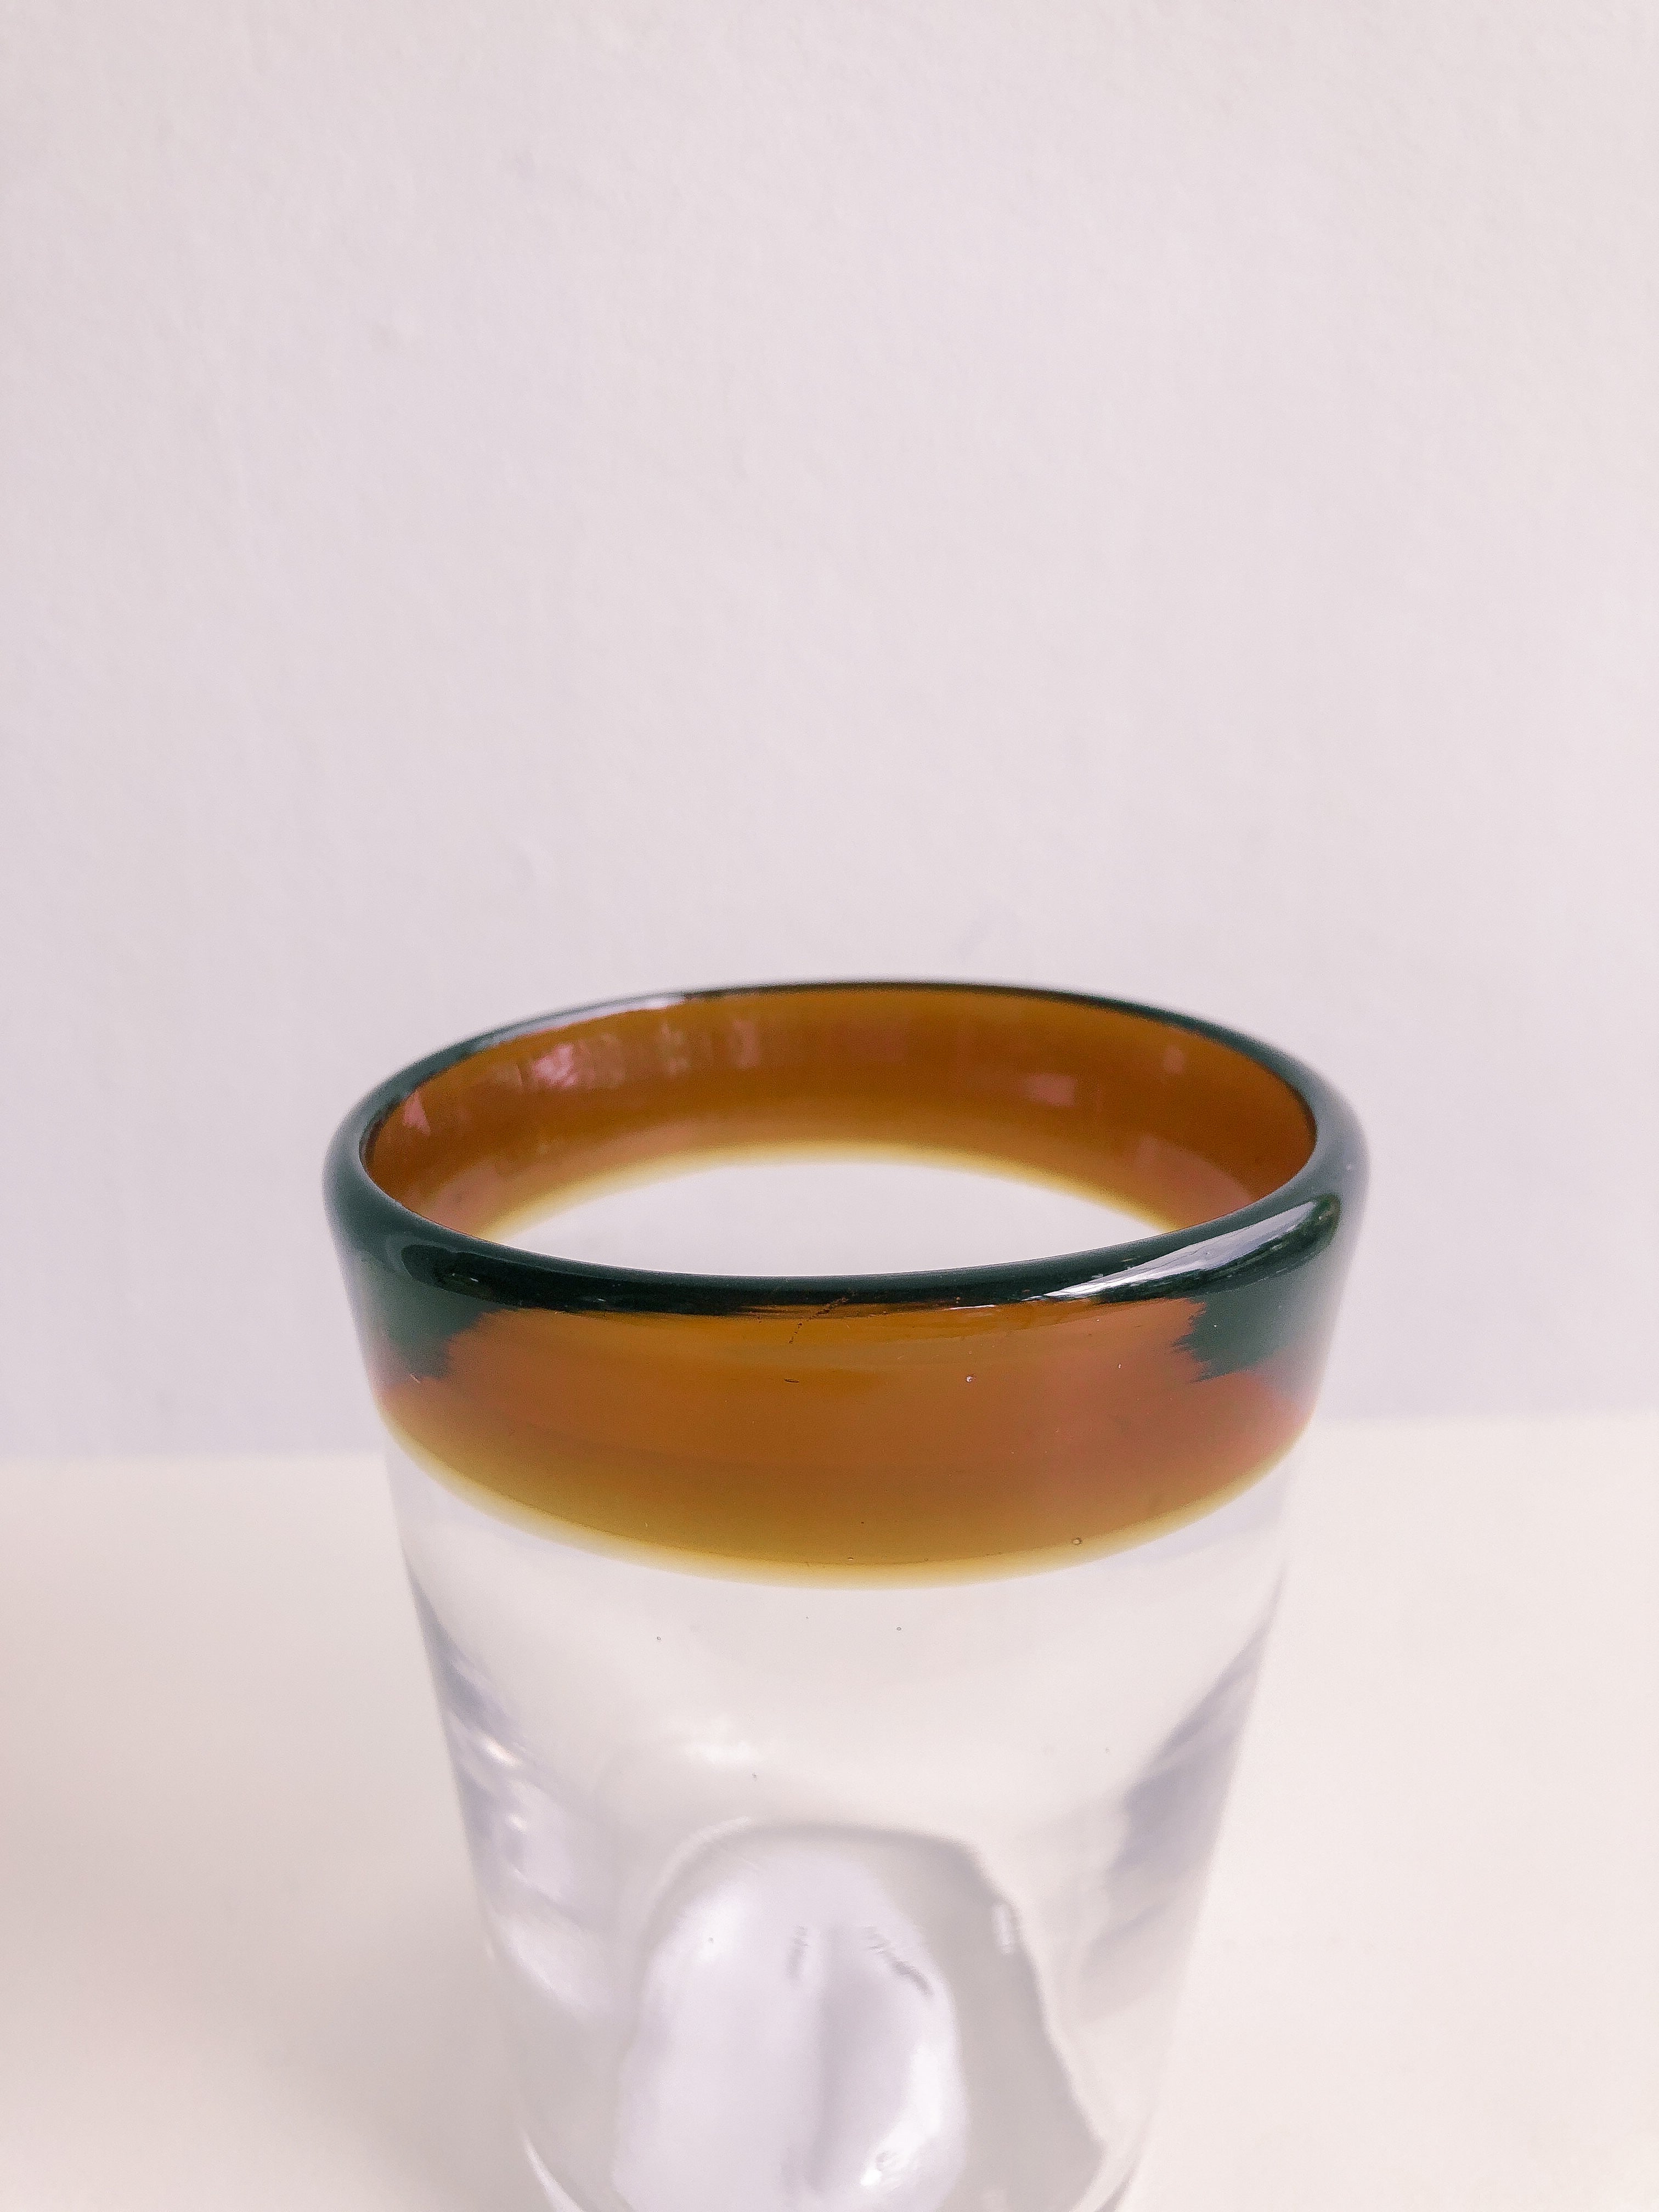 Water Glasses in Coffee by PROSE Tabletop